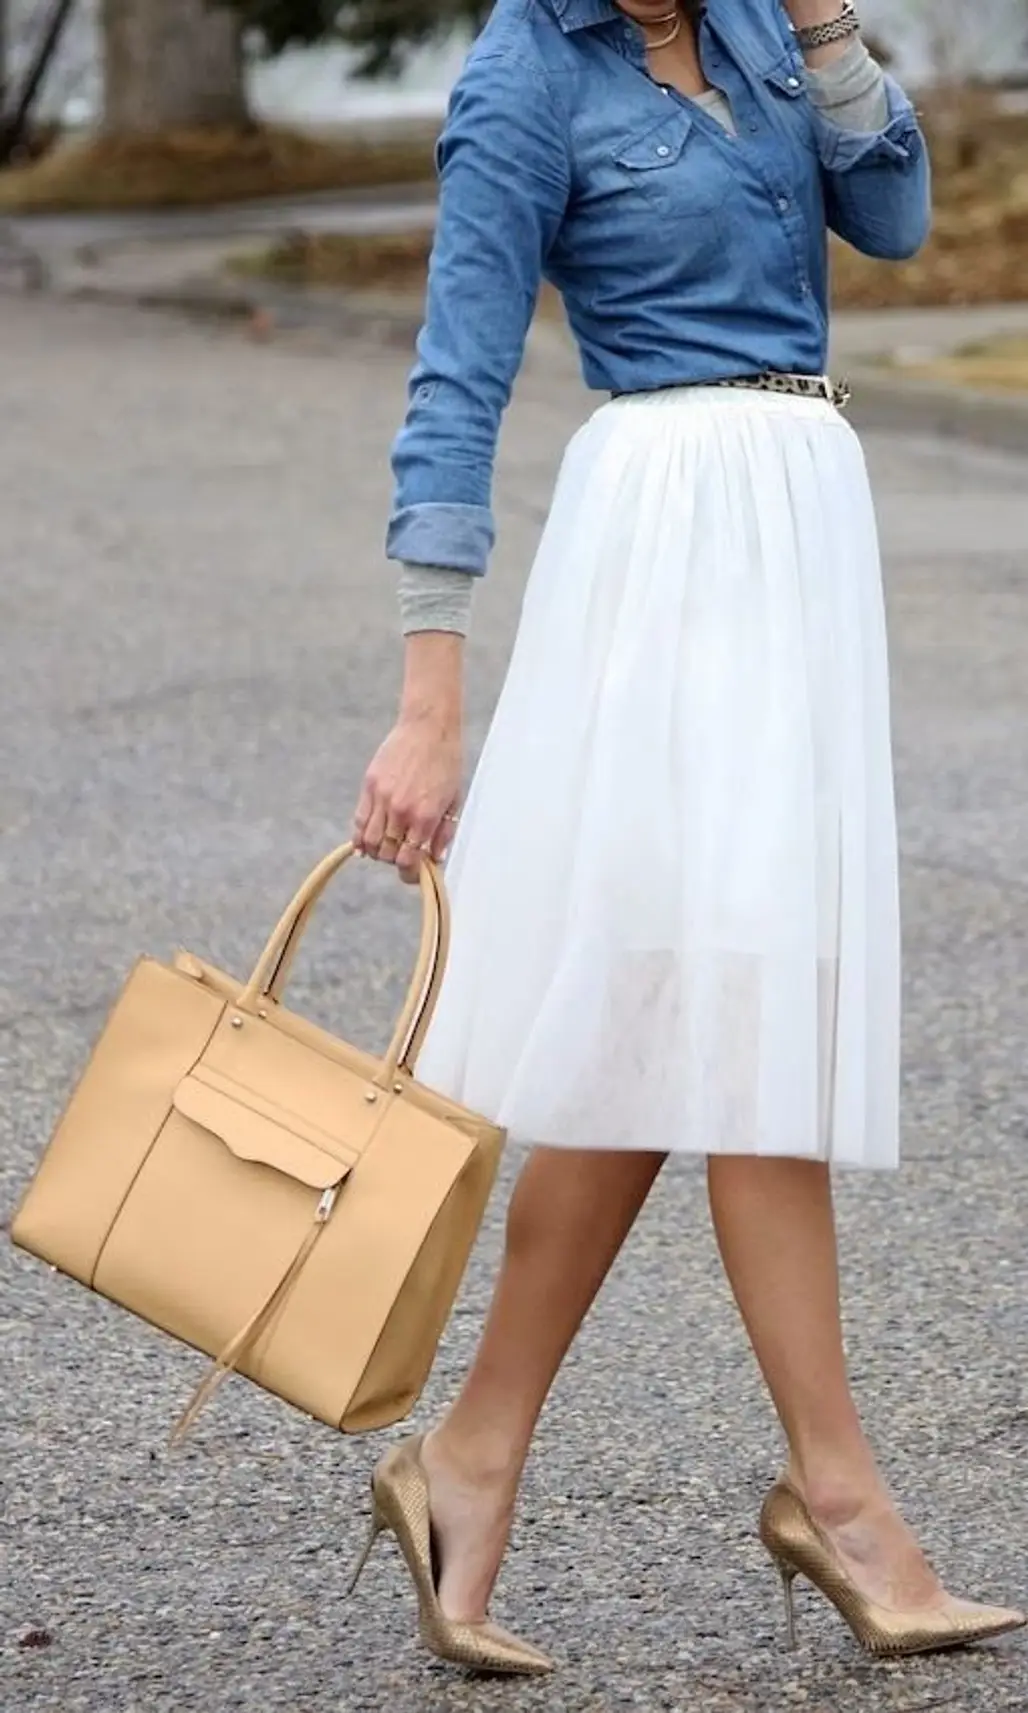 Chambray Shirts Will Never Go out of Style, and Neither Will Tulle Peekaboo Skirts